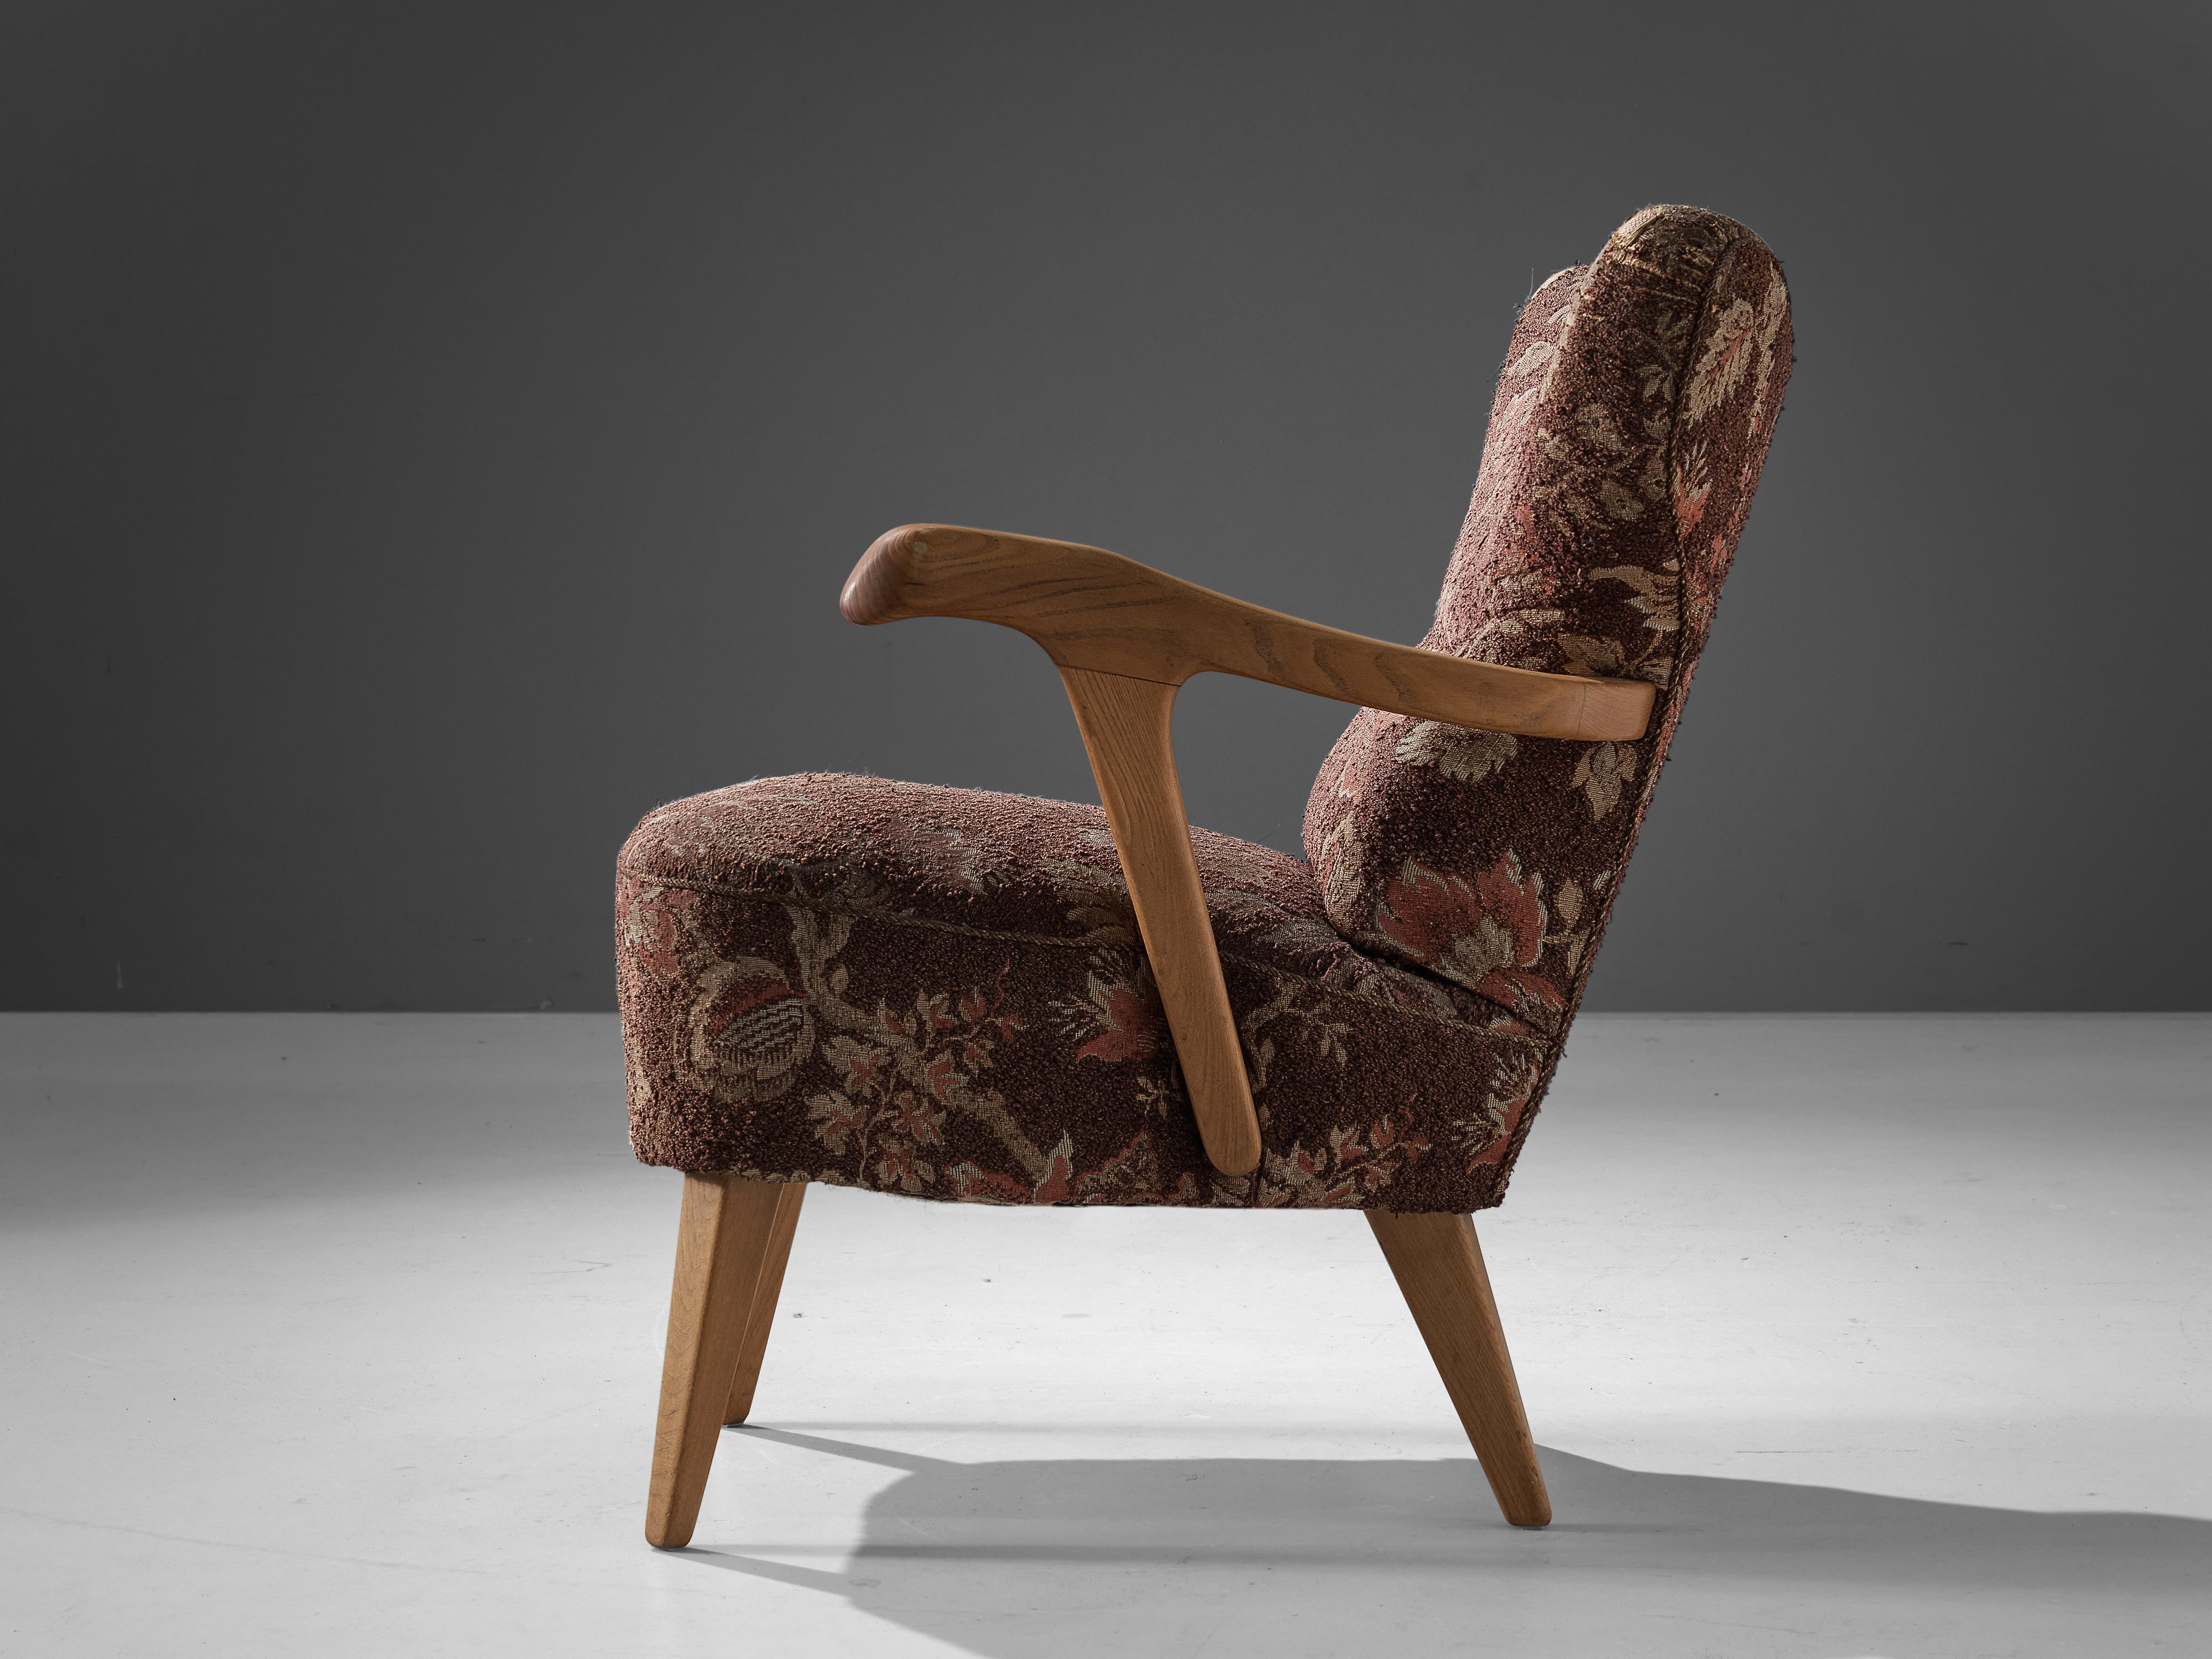 Lounge chair, oak, fabric, Italy, 1960s

This sculptural wingback chair of the 1960s is both extremely comfortable and pleasing to the eyes. This easy chair features curved, armchairs made out of oak that add to the shape of thje chair. The seat